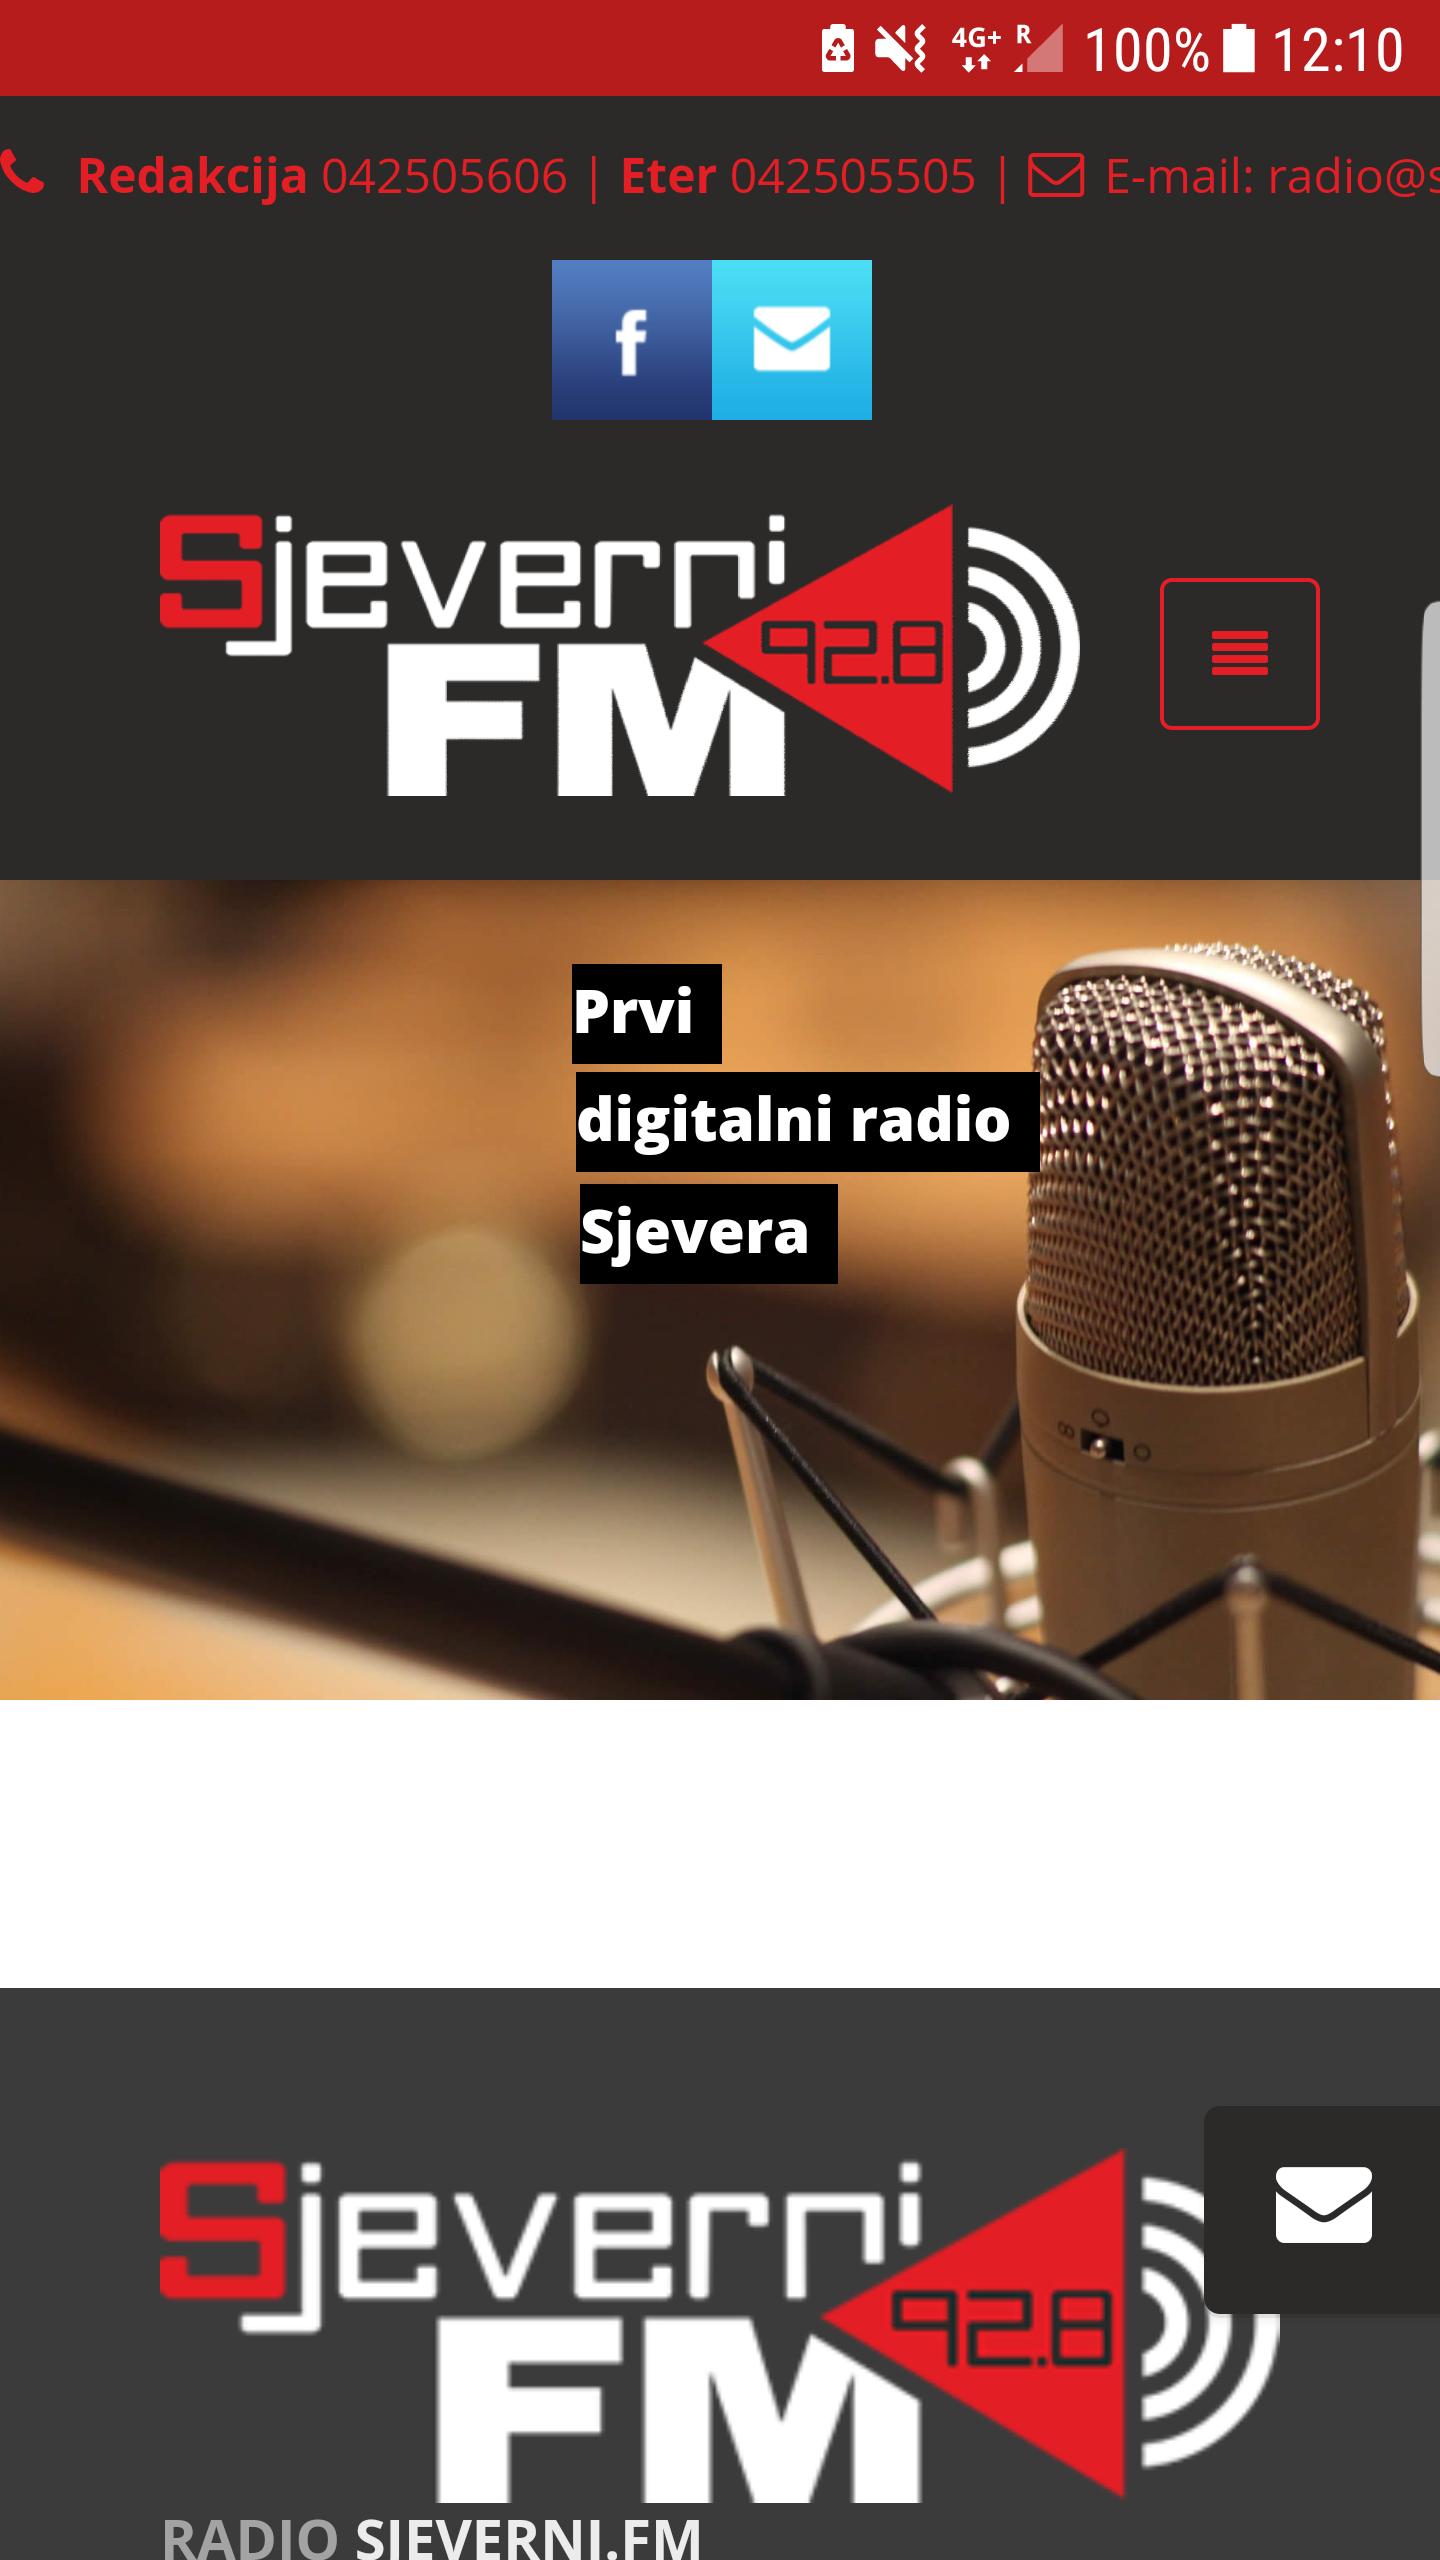 Sjeverni FM for Android - APK Download